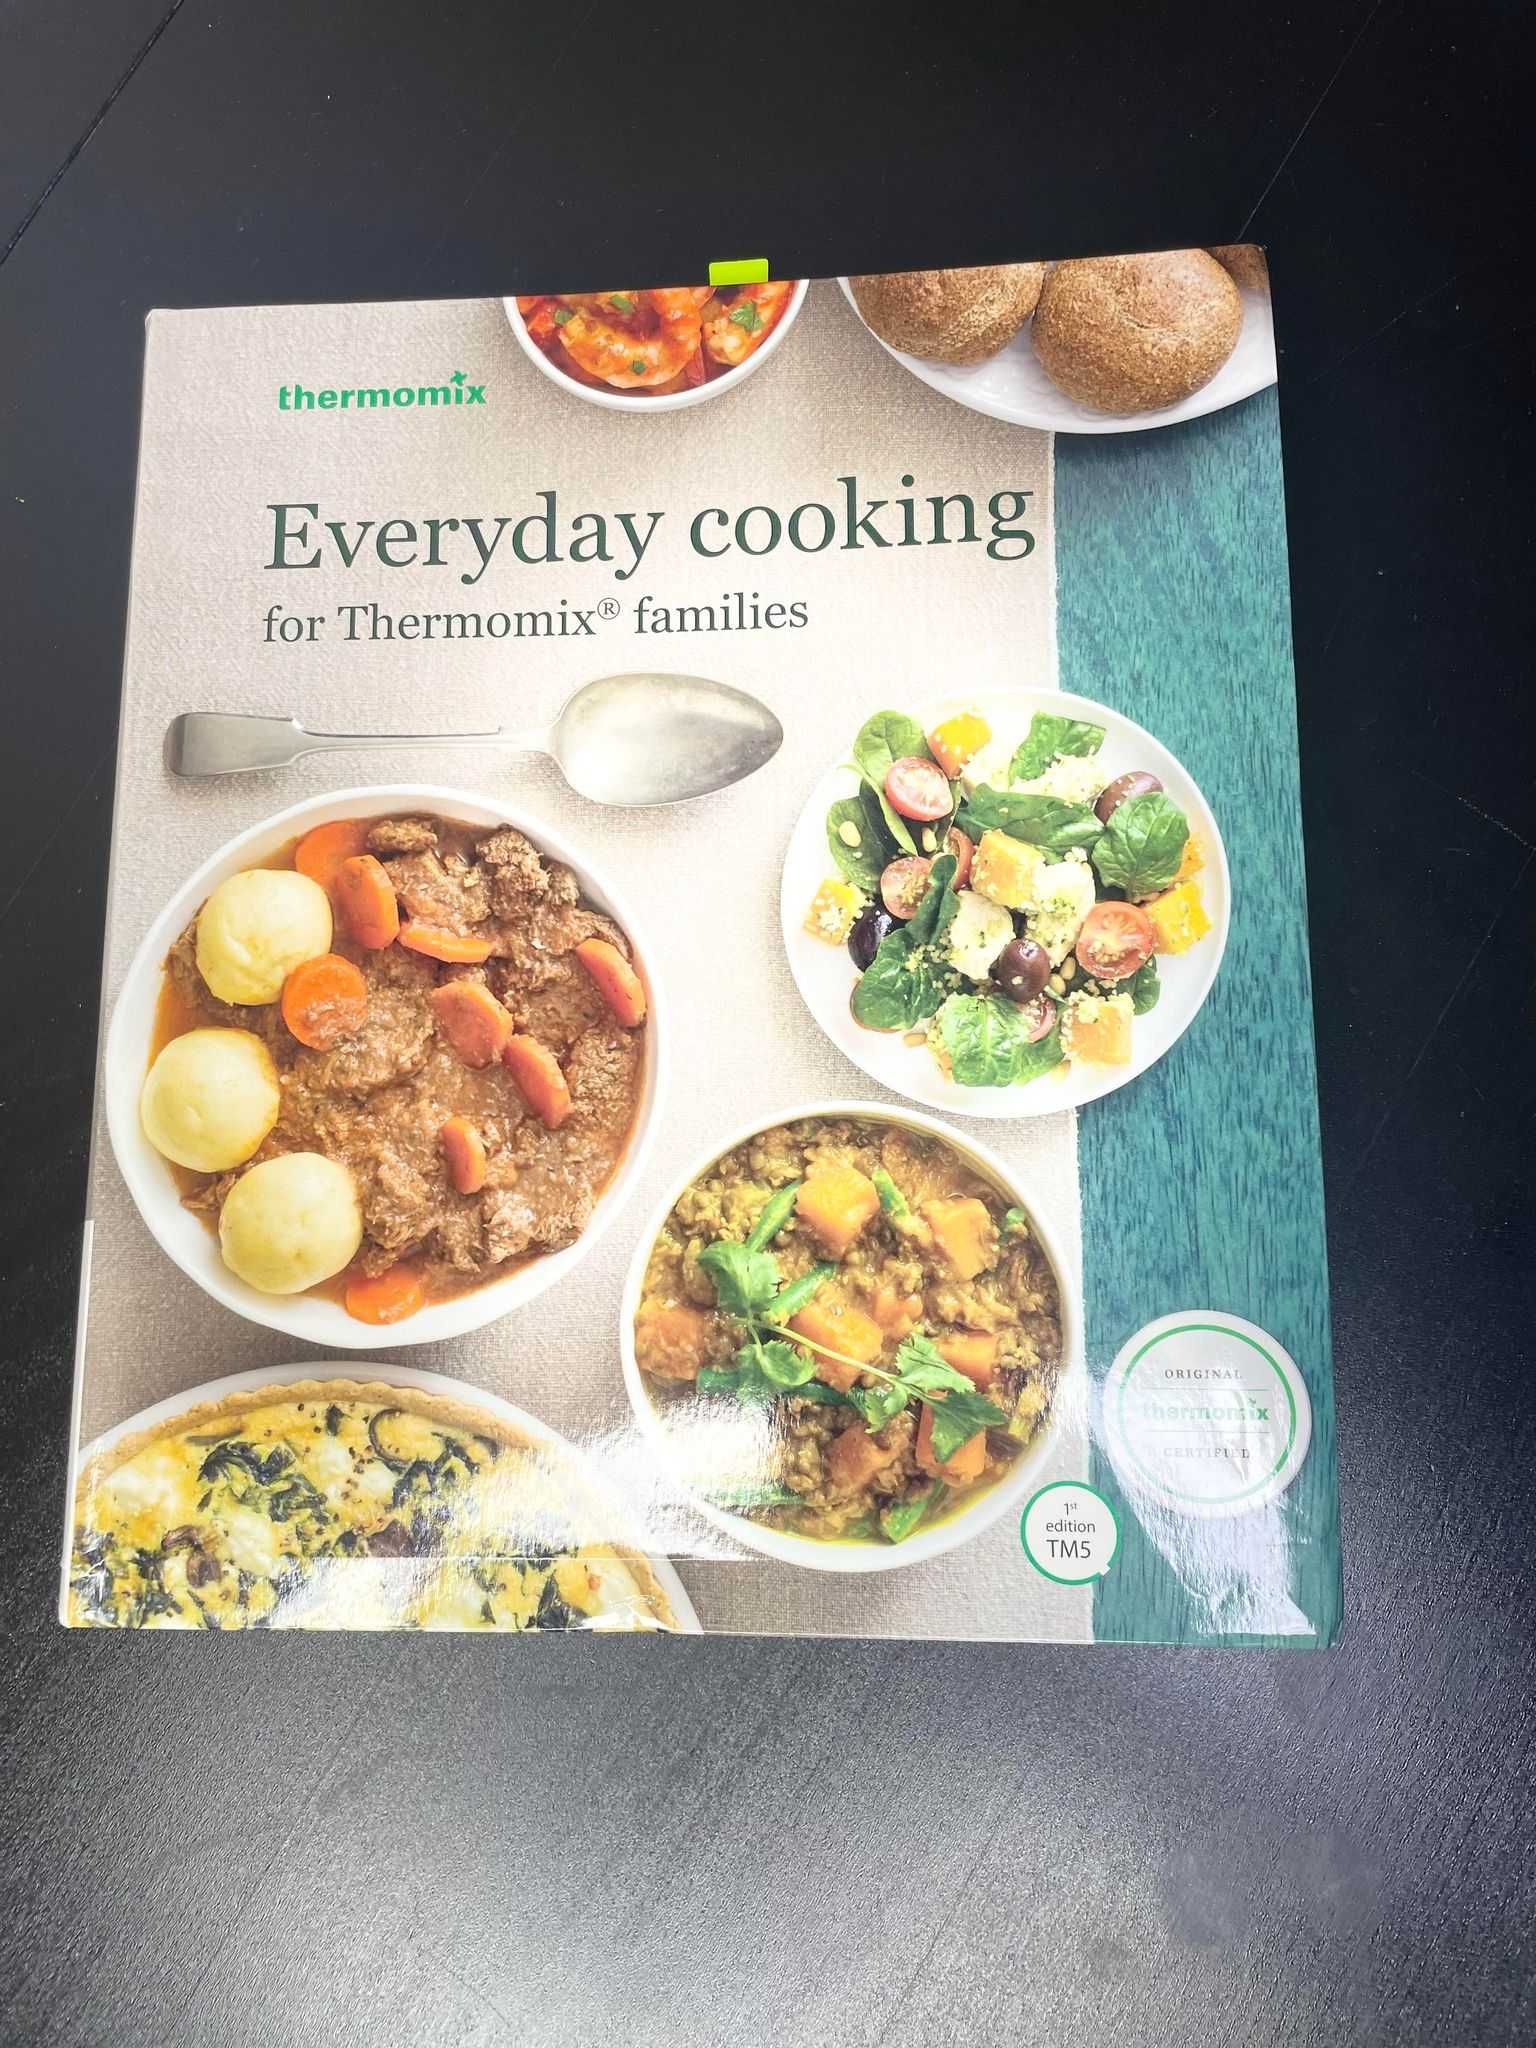 ”Everyday Cooking Thermomix families”